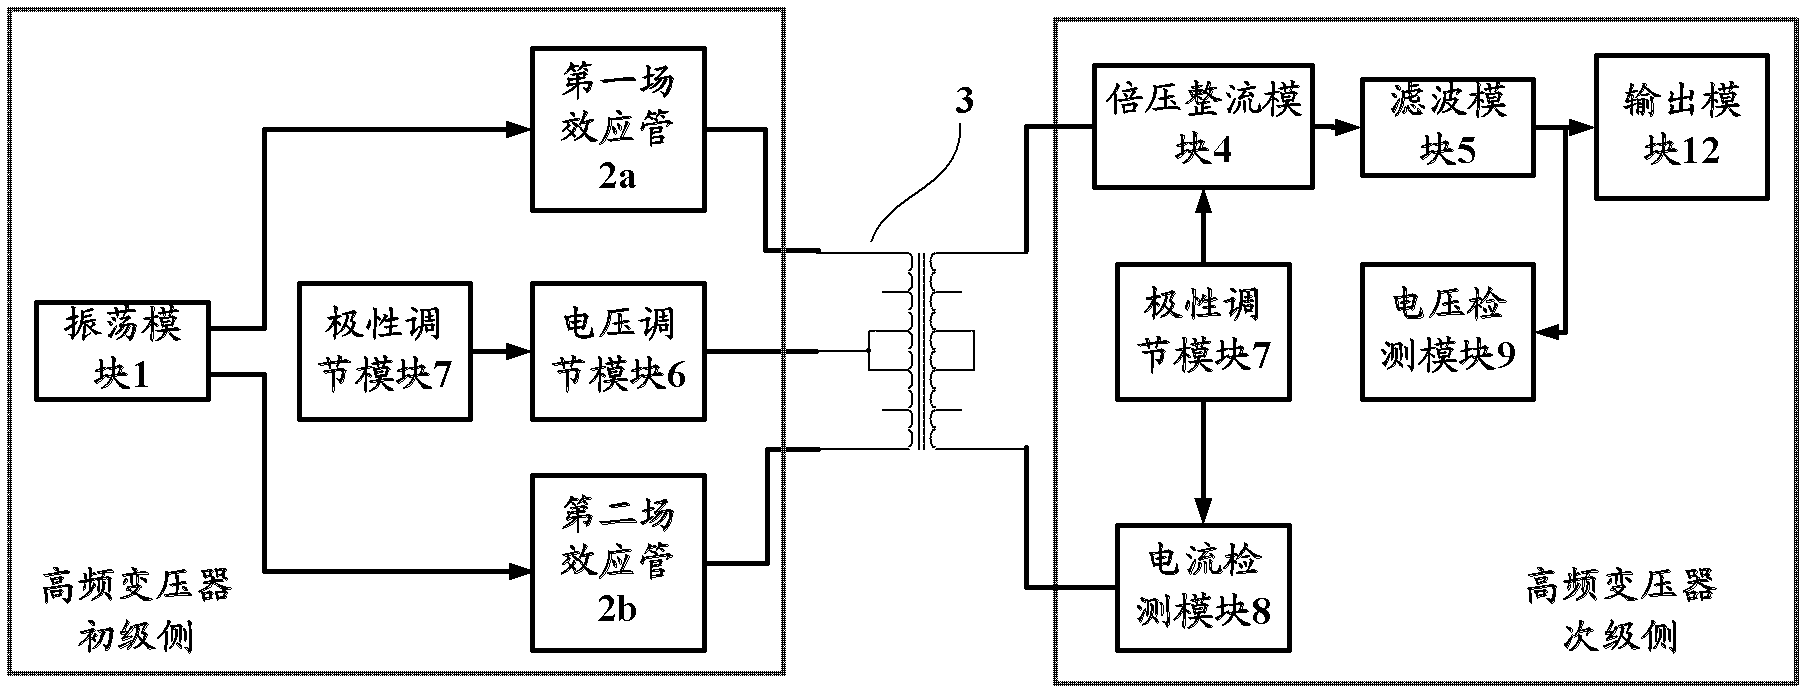 Electron spray ionization (ESI) source and controllable high-voltage direct current power supply for ESI source